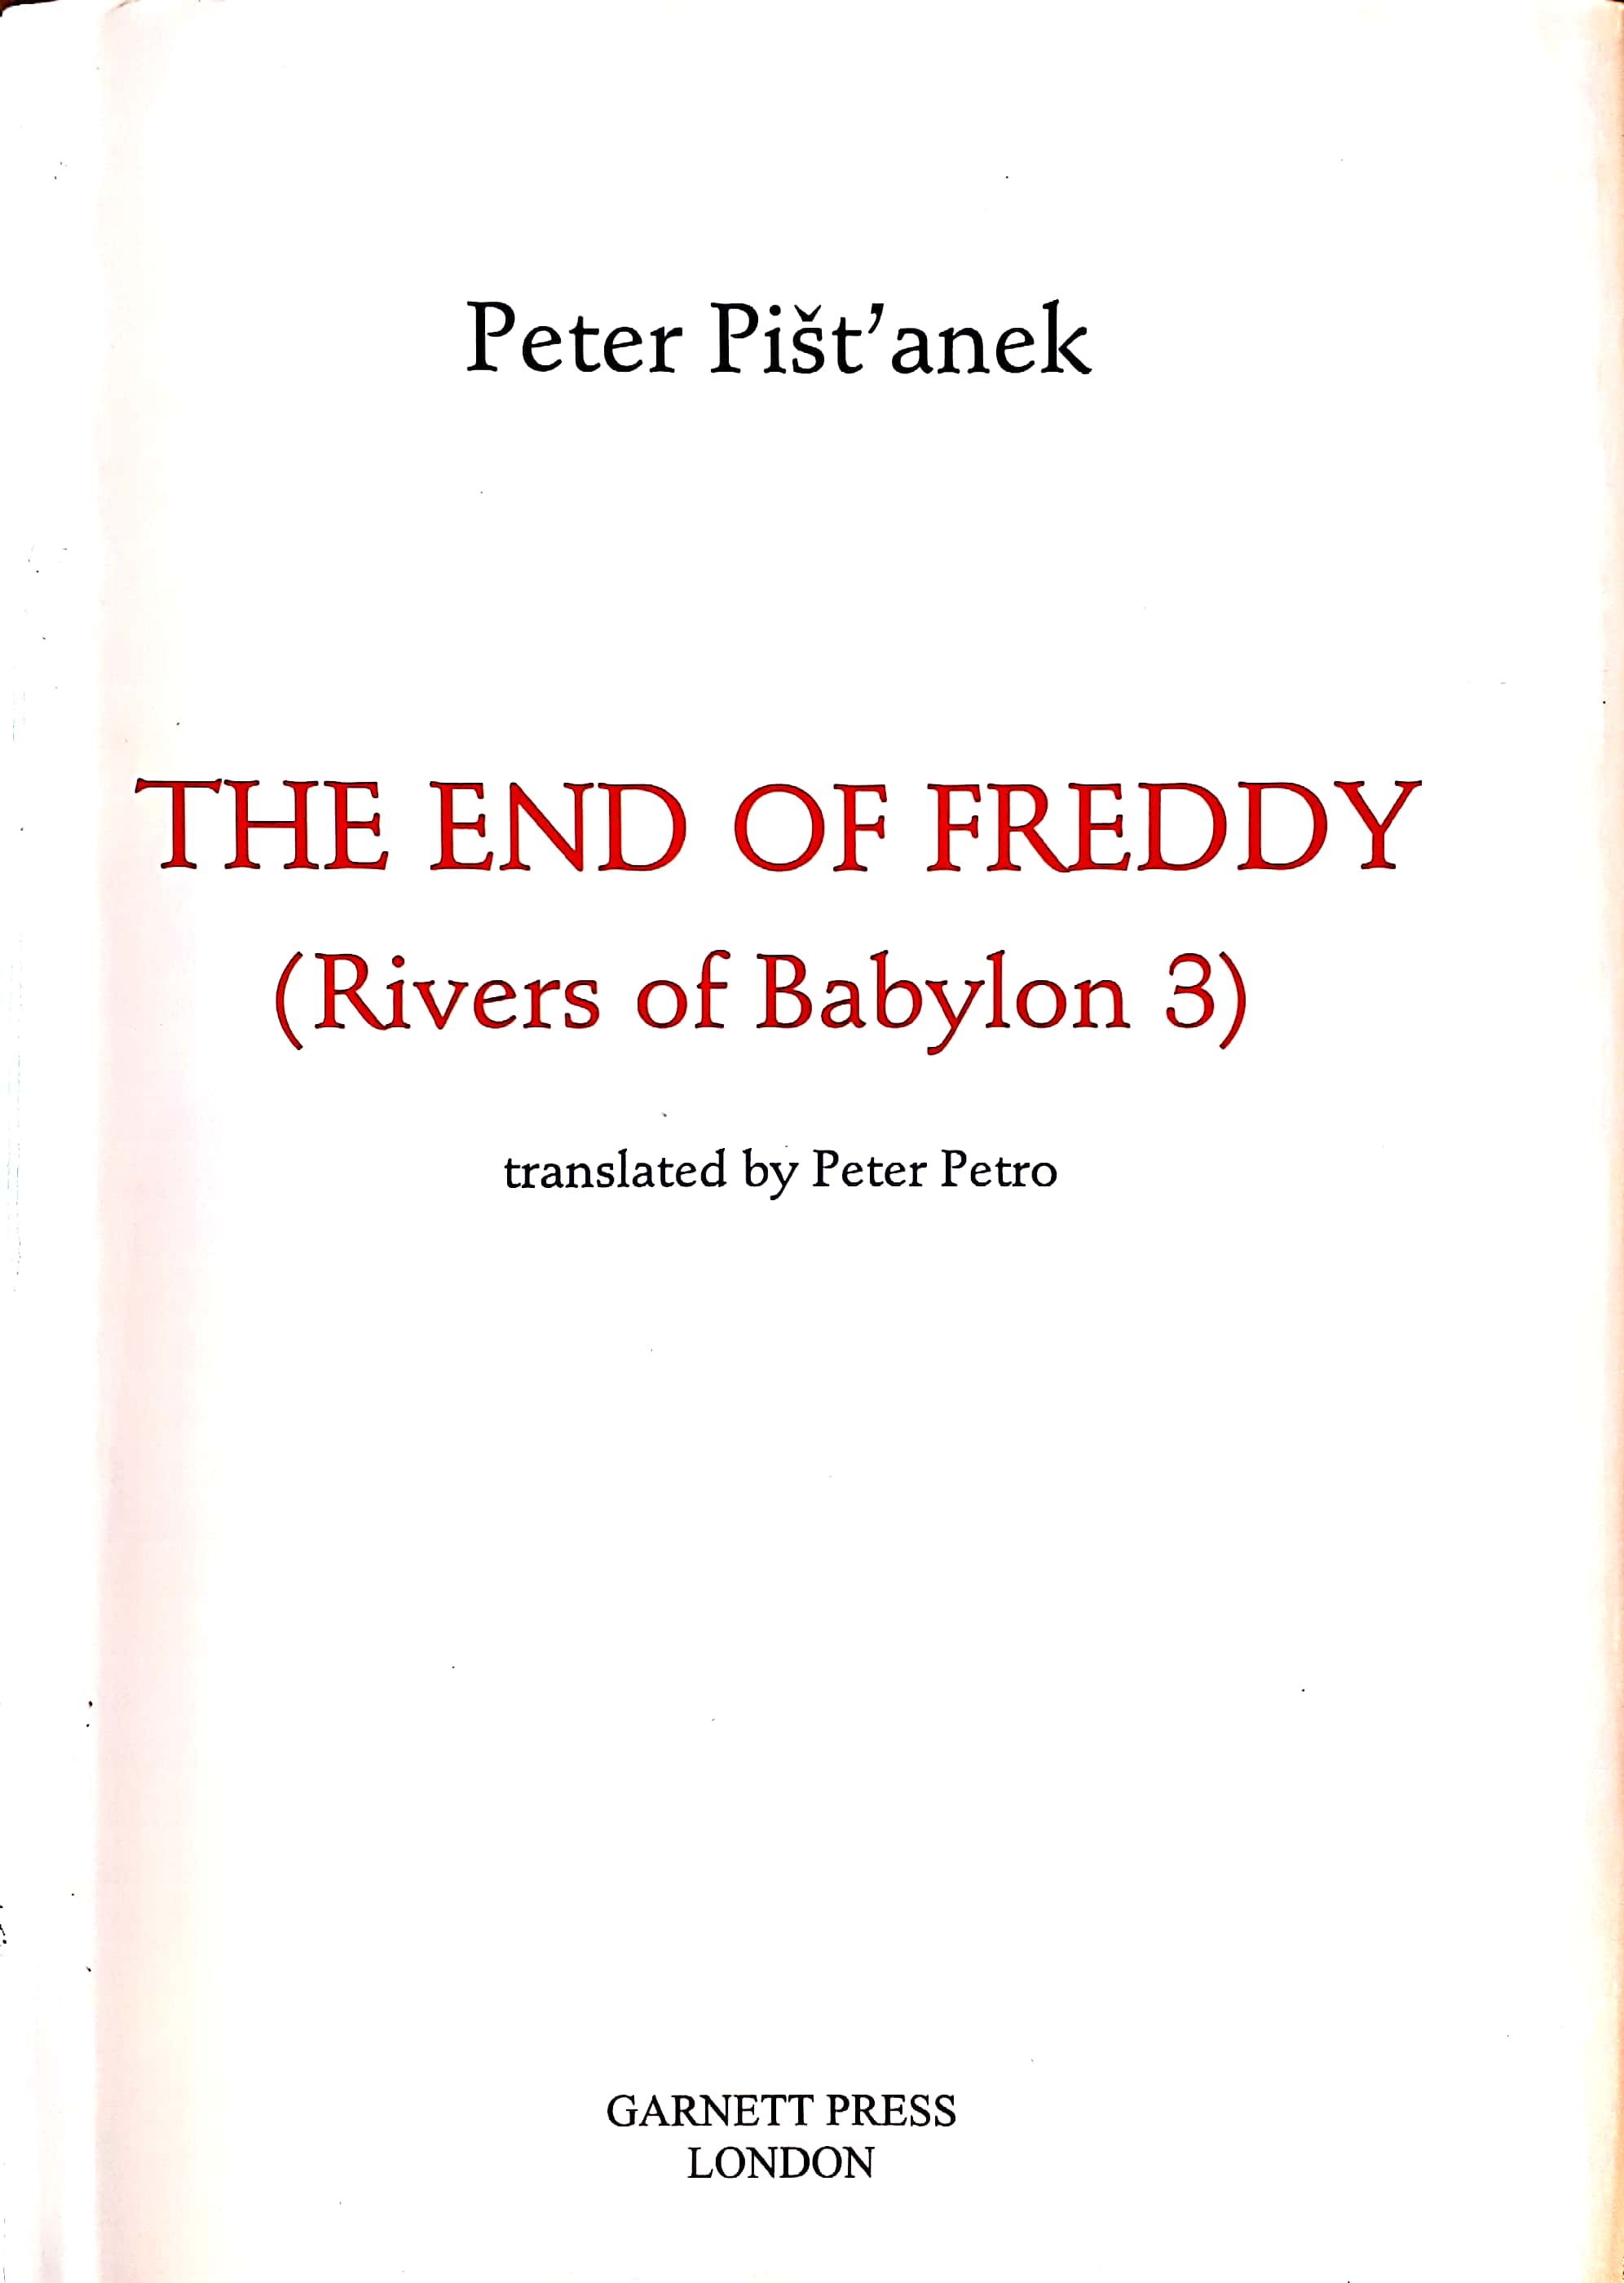 front cover of Peter Pistanek – The End of Freddy Rivers of Babylon 3